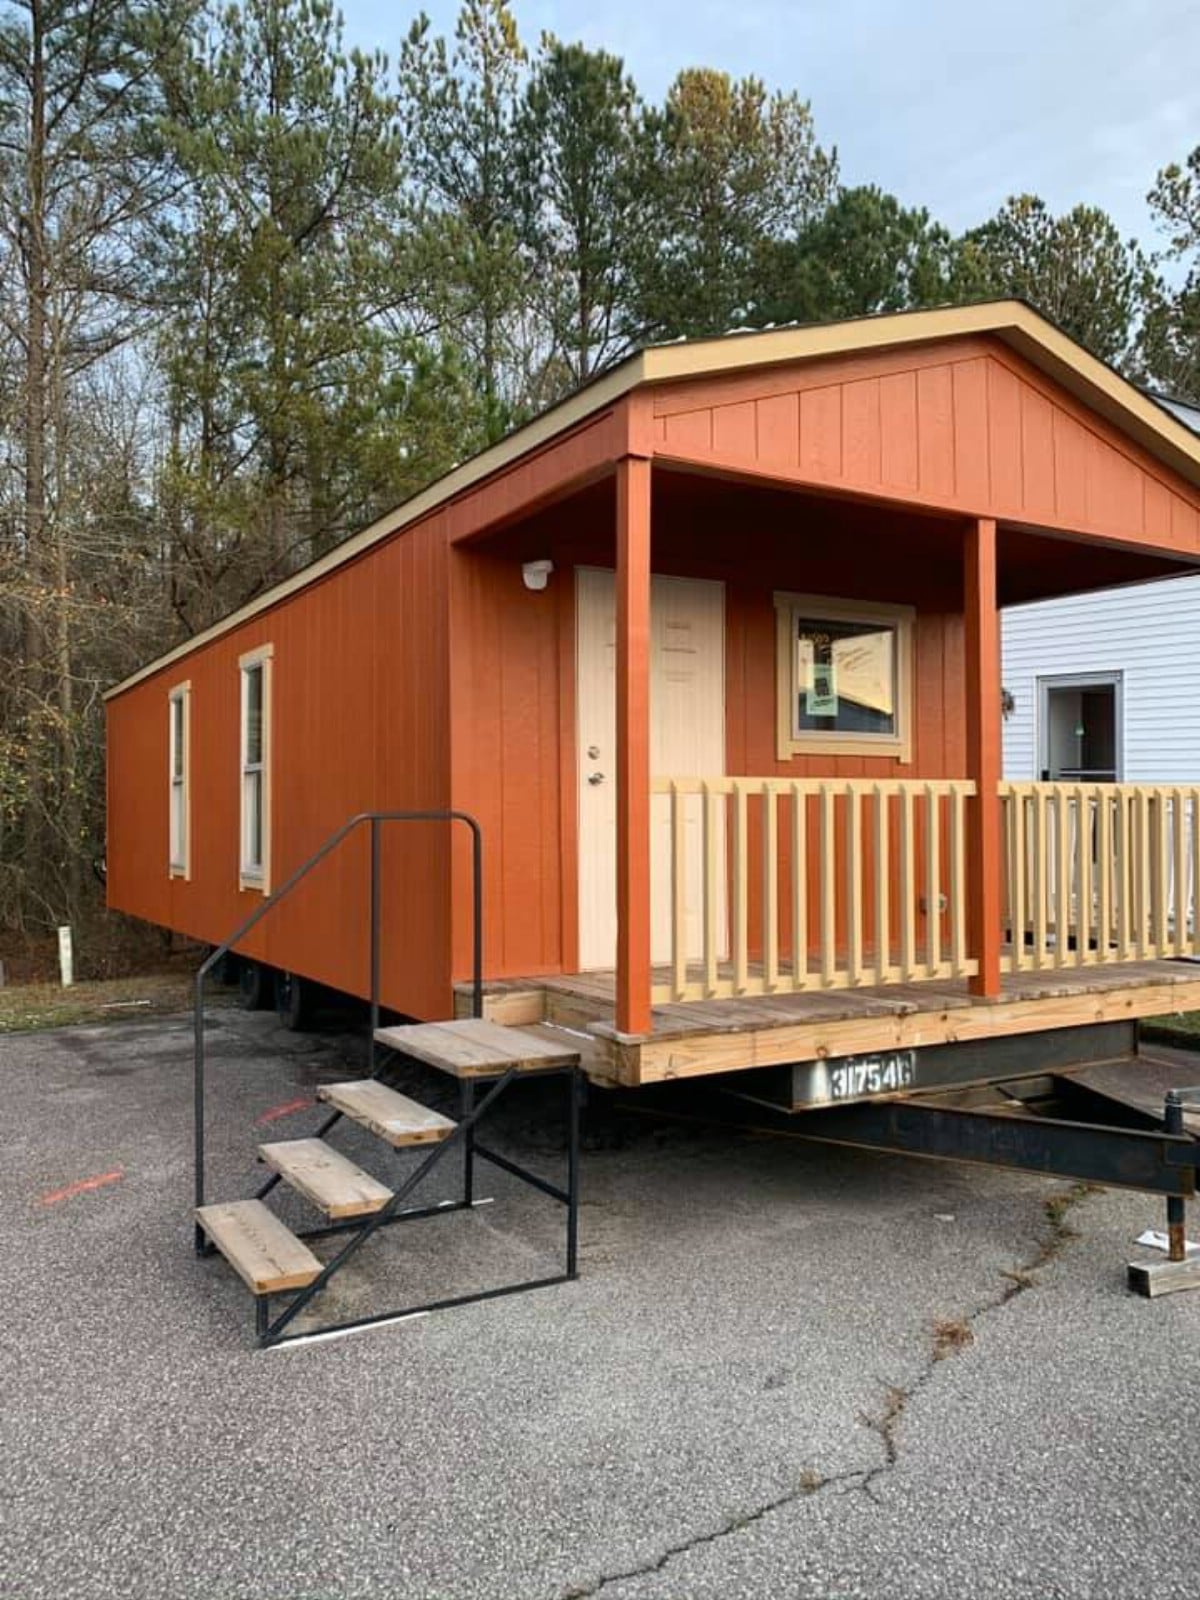 This Tiny House in Georgia is For Sale For Just $27,500 - Tiny Houses